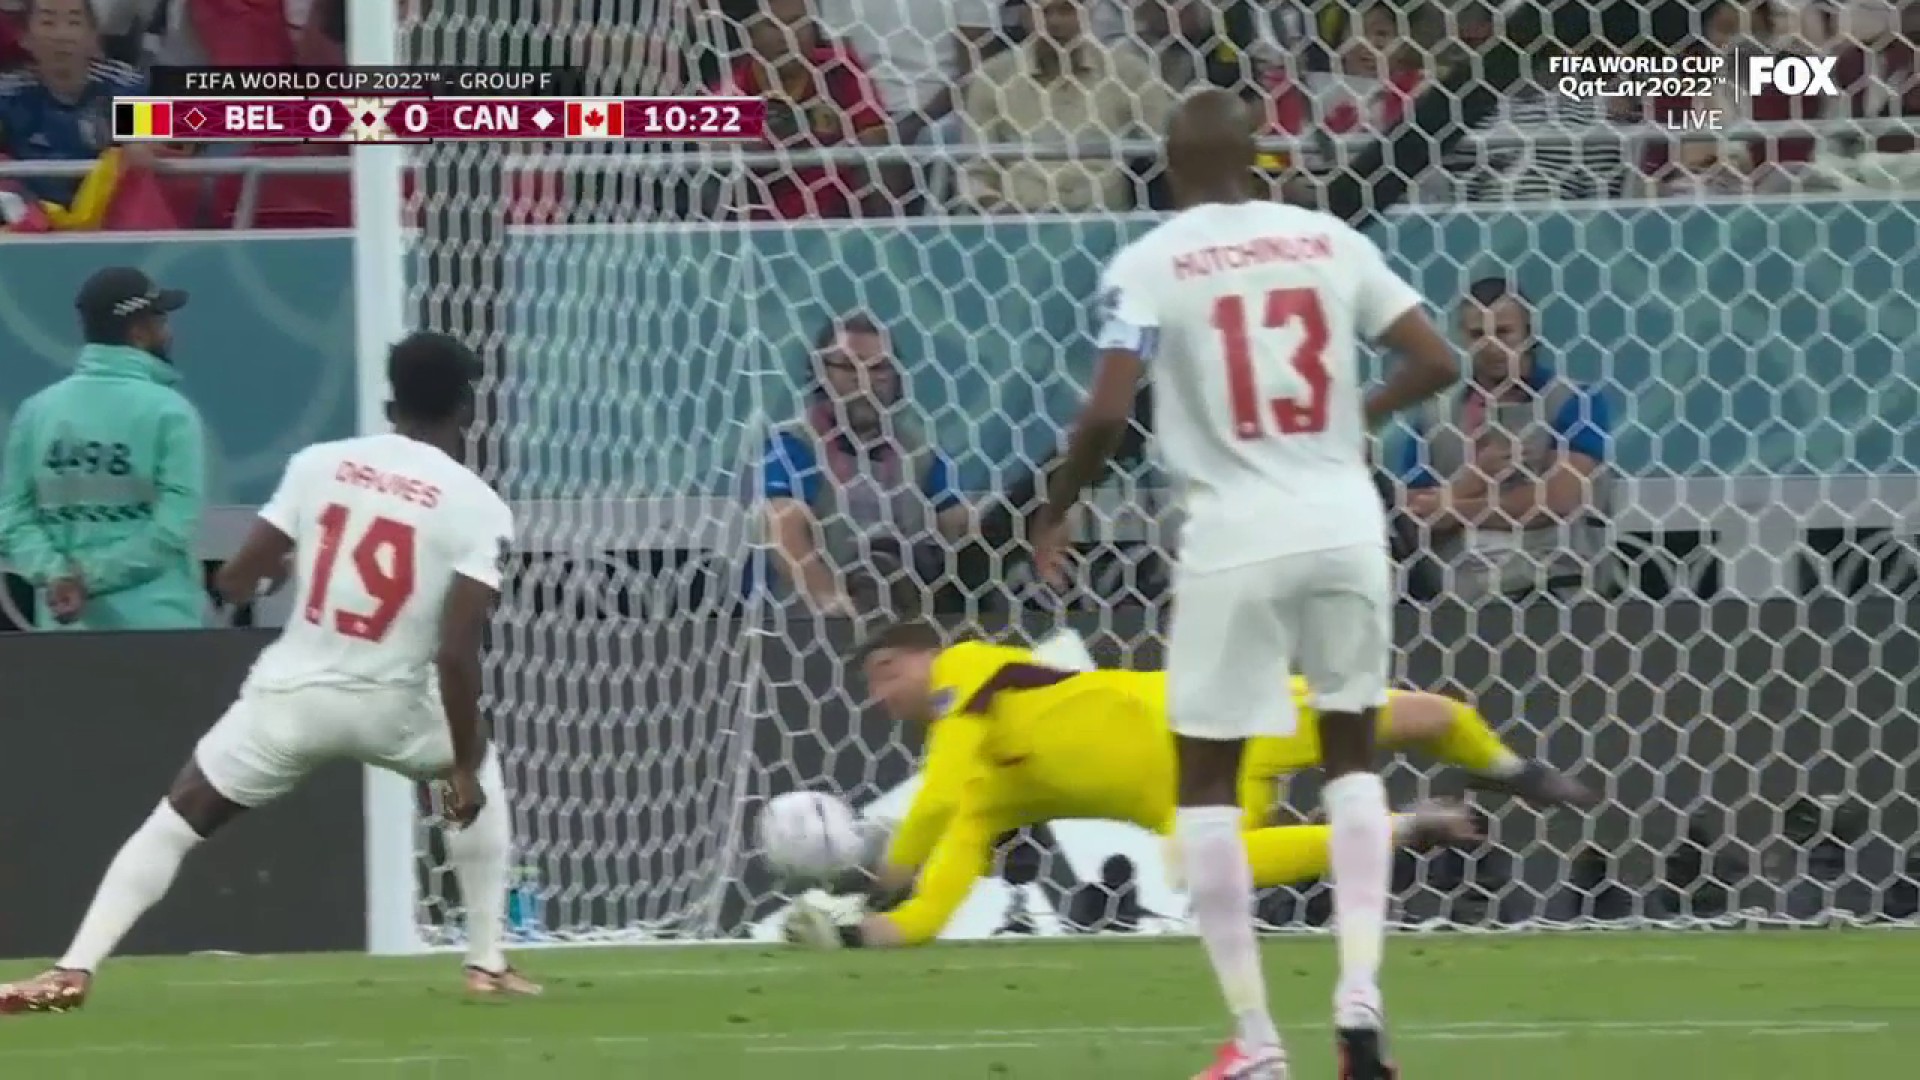 MASSIVE SAVE BY COURTOIS 🇧🇪”